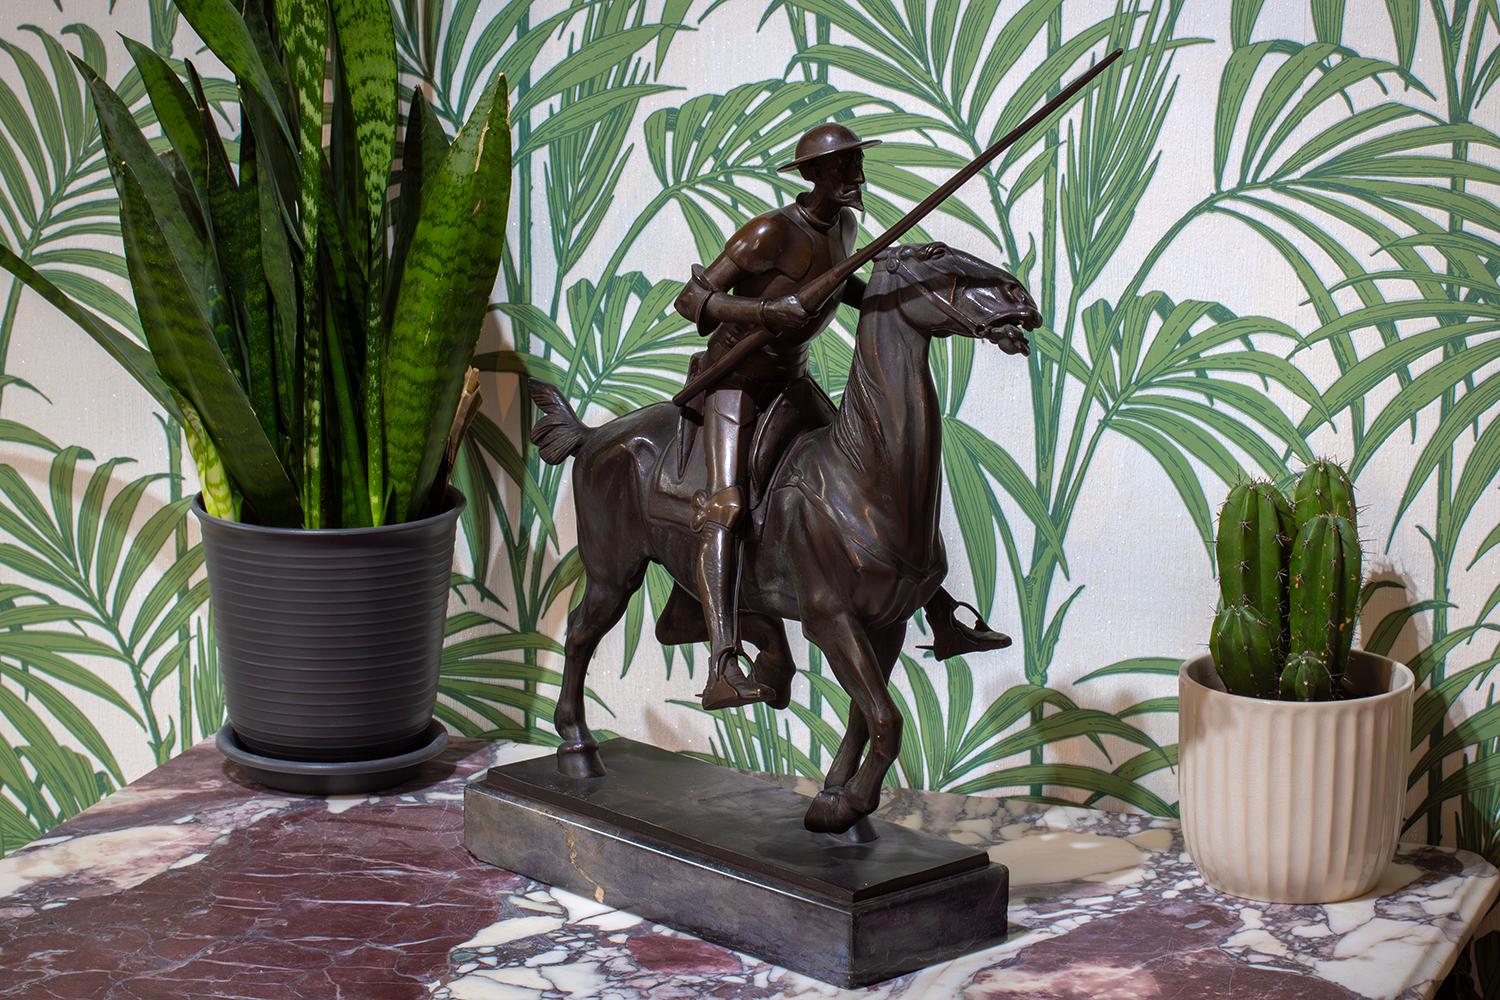 From our Sculpture collection, we are delighted to offer this German Bronze featuring Don Quixote. The Bronze cast in a styled naturalistic form as a horse and rider bearing a jousting pole. The Bronze modelled as Don Quixote from the early 17th